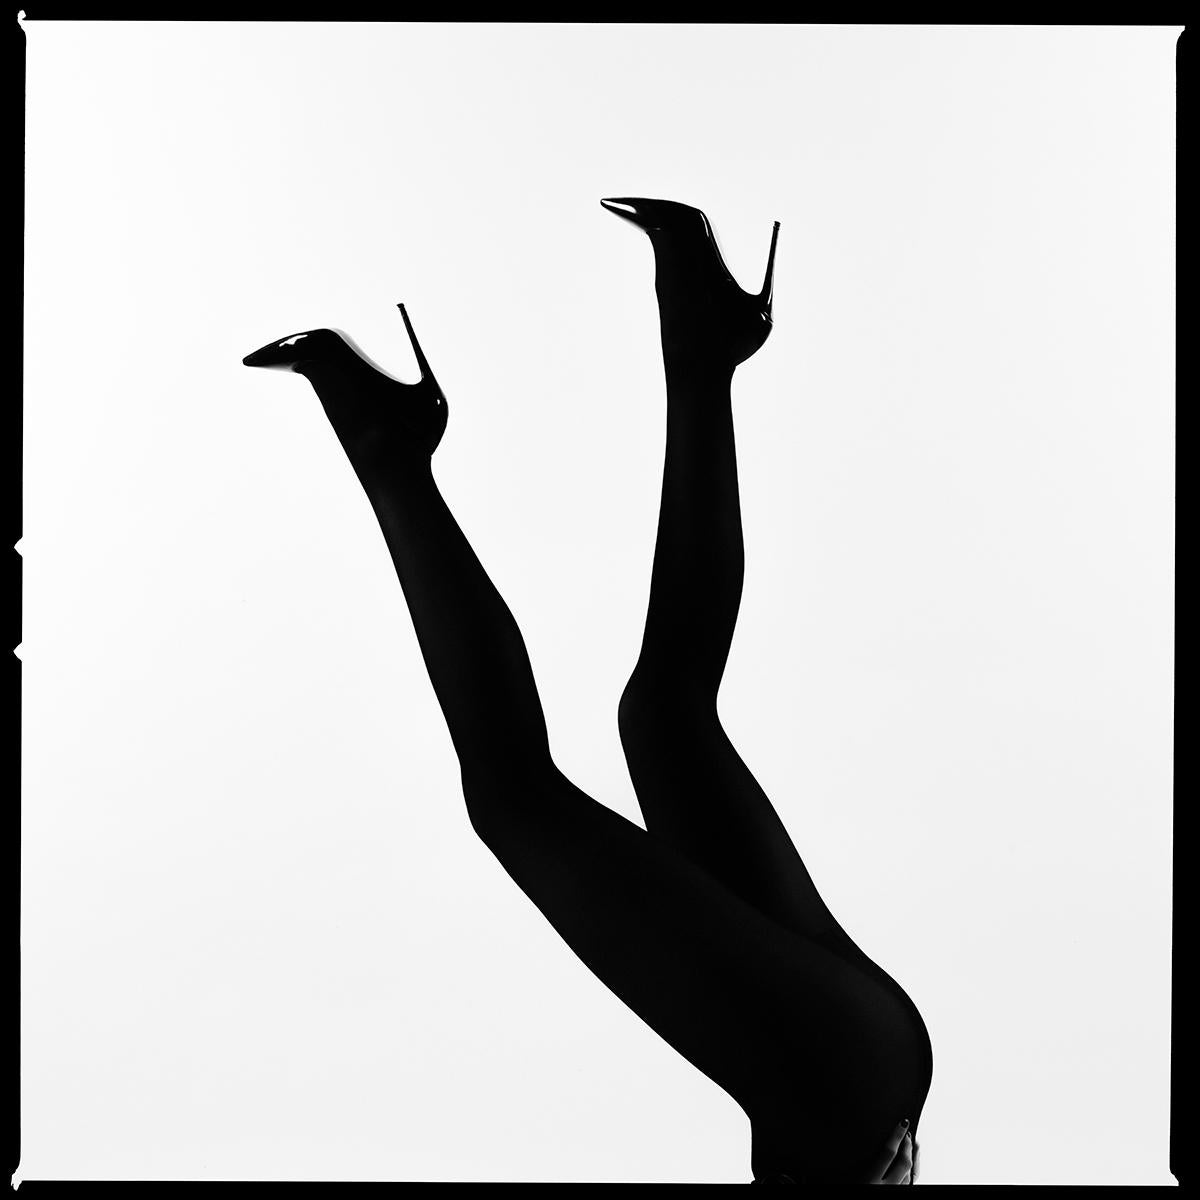 Tyler Shields Black and White Photograph - Legs Up Silhouette (45" x 45")